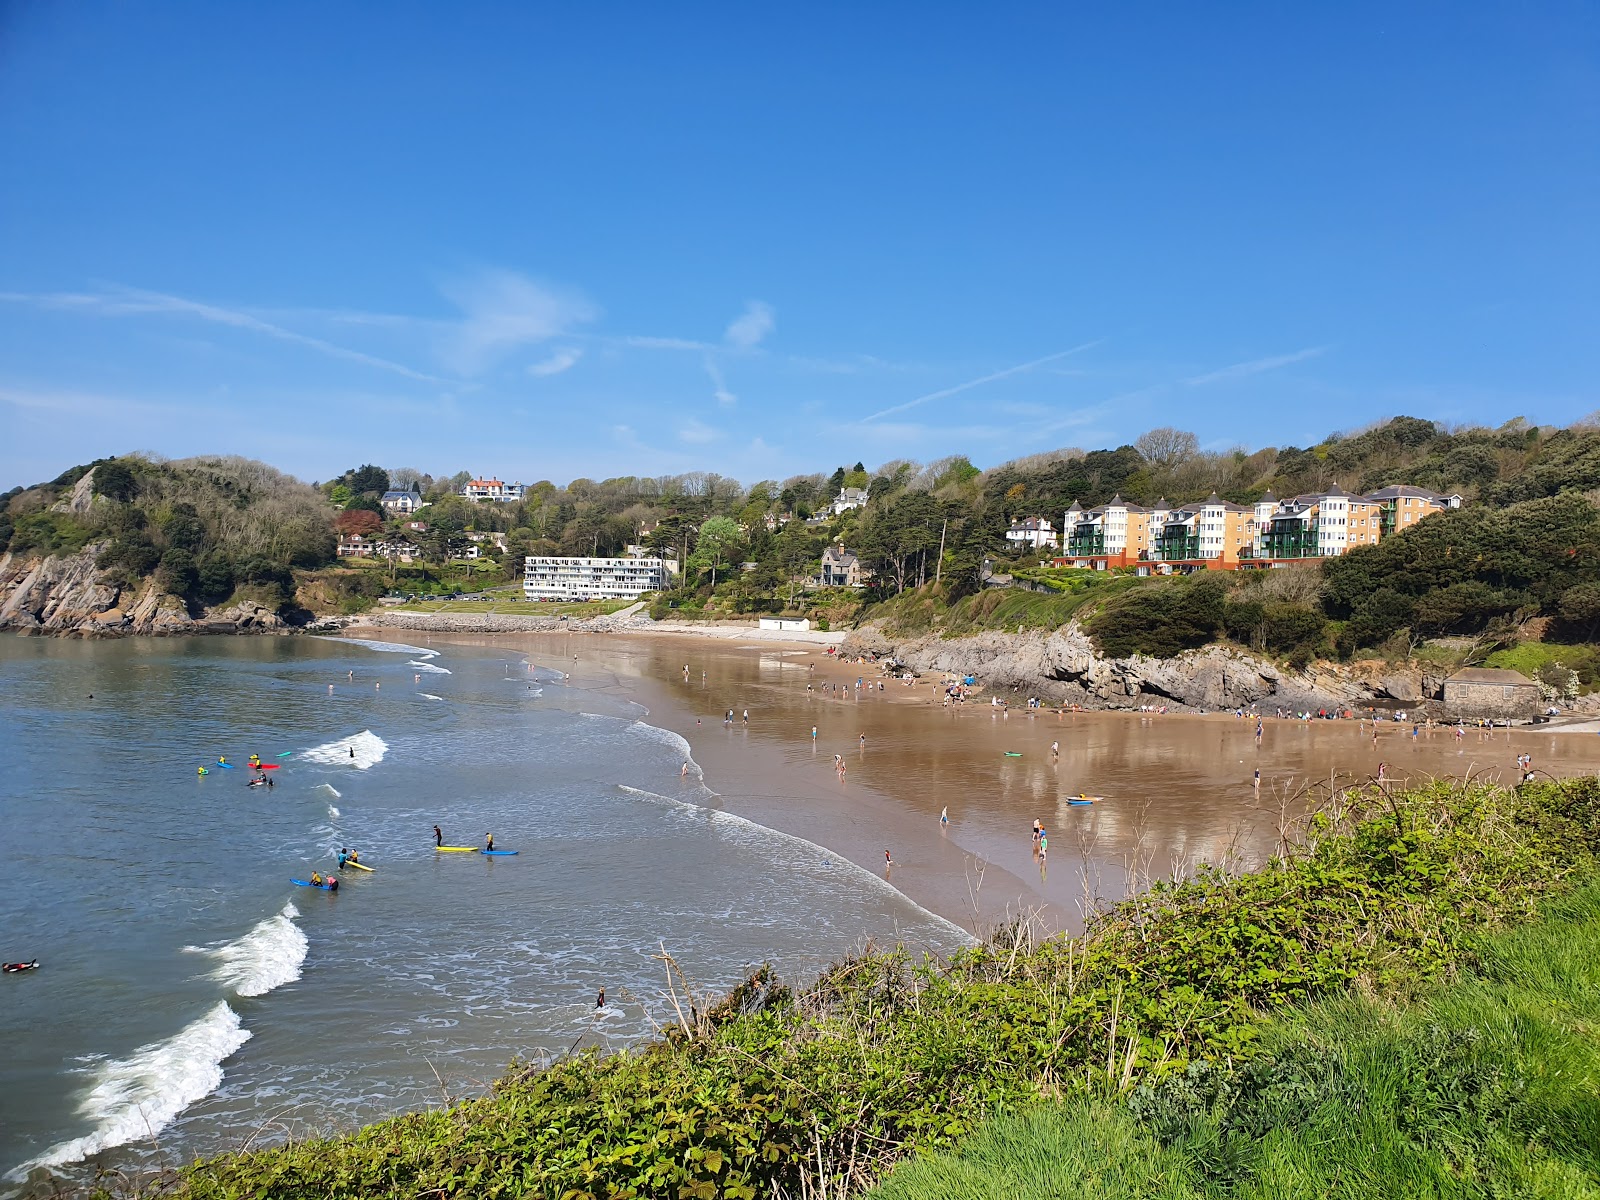 Foto af Caswell Bay beach med lys sand overflade